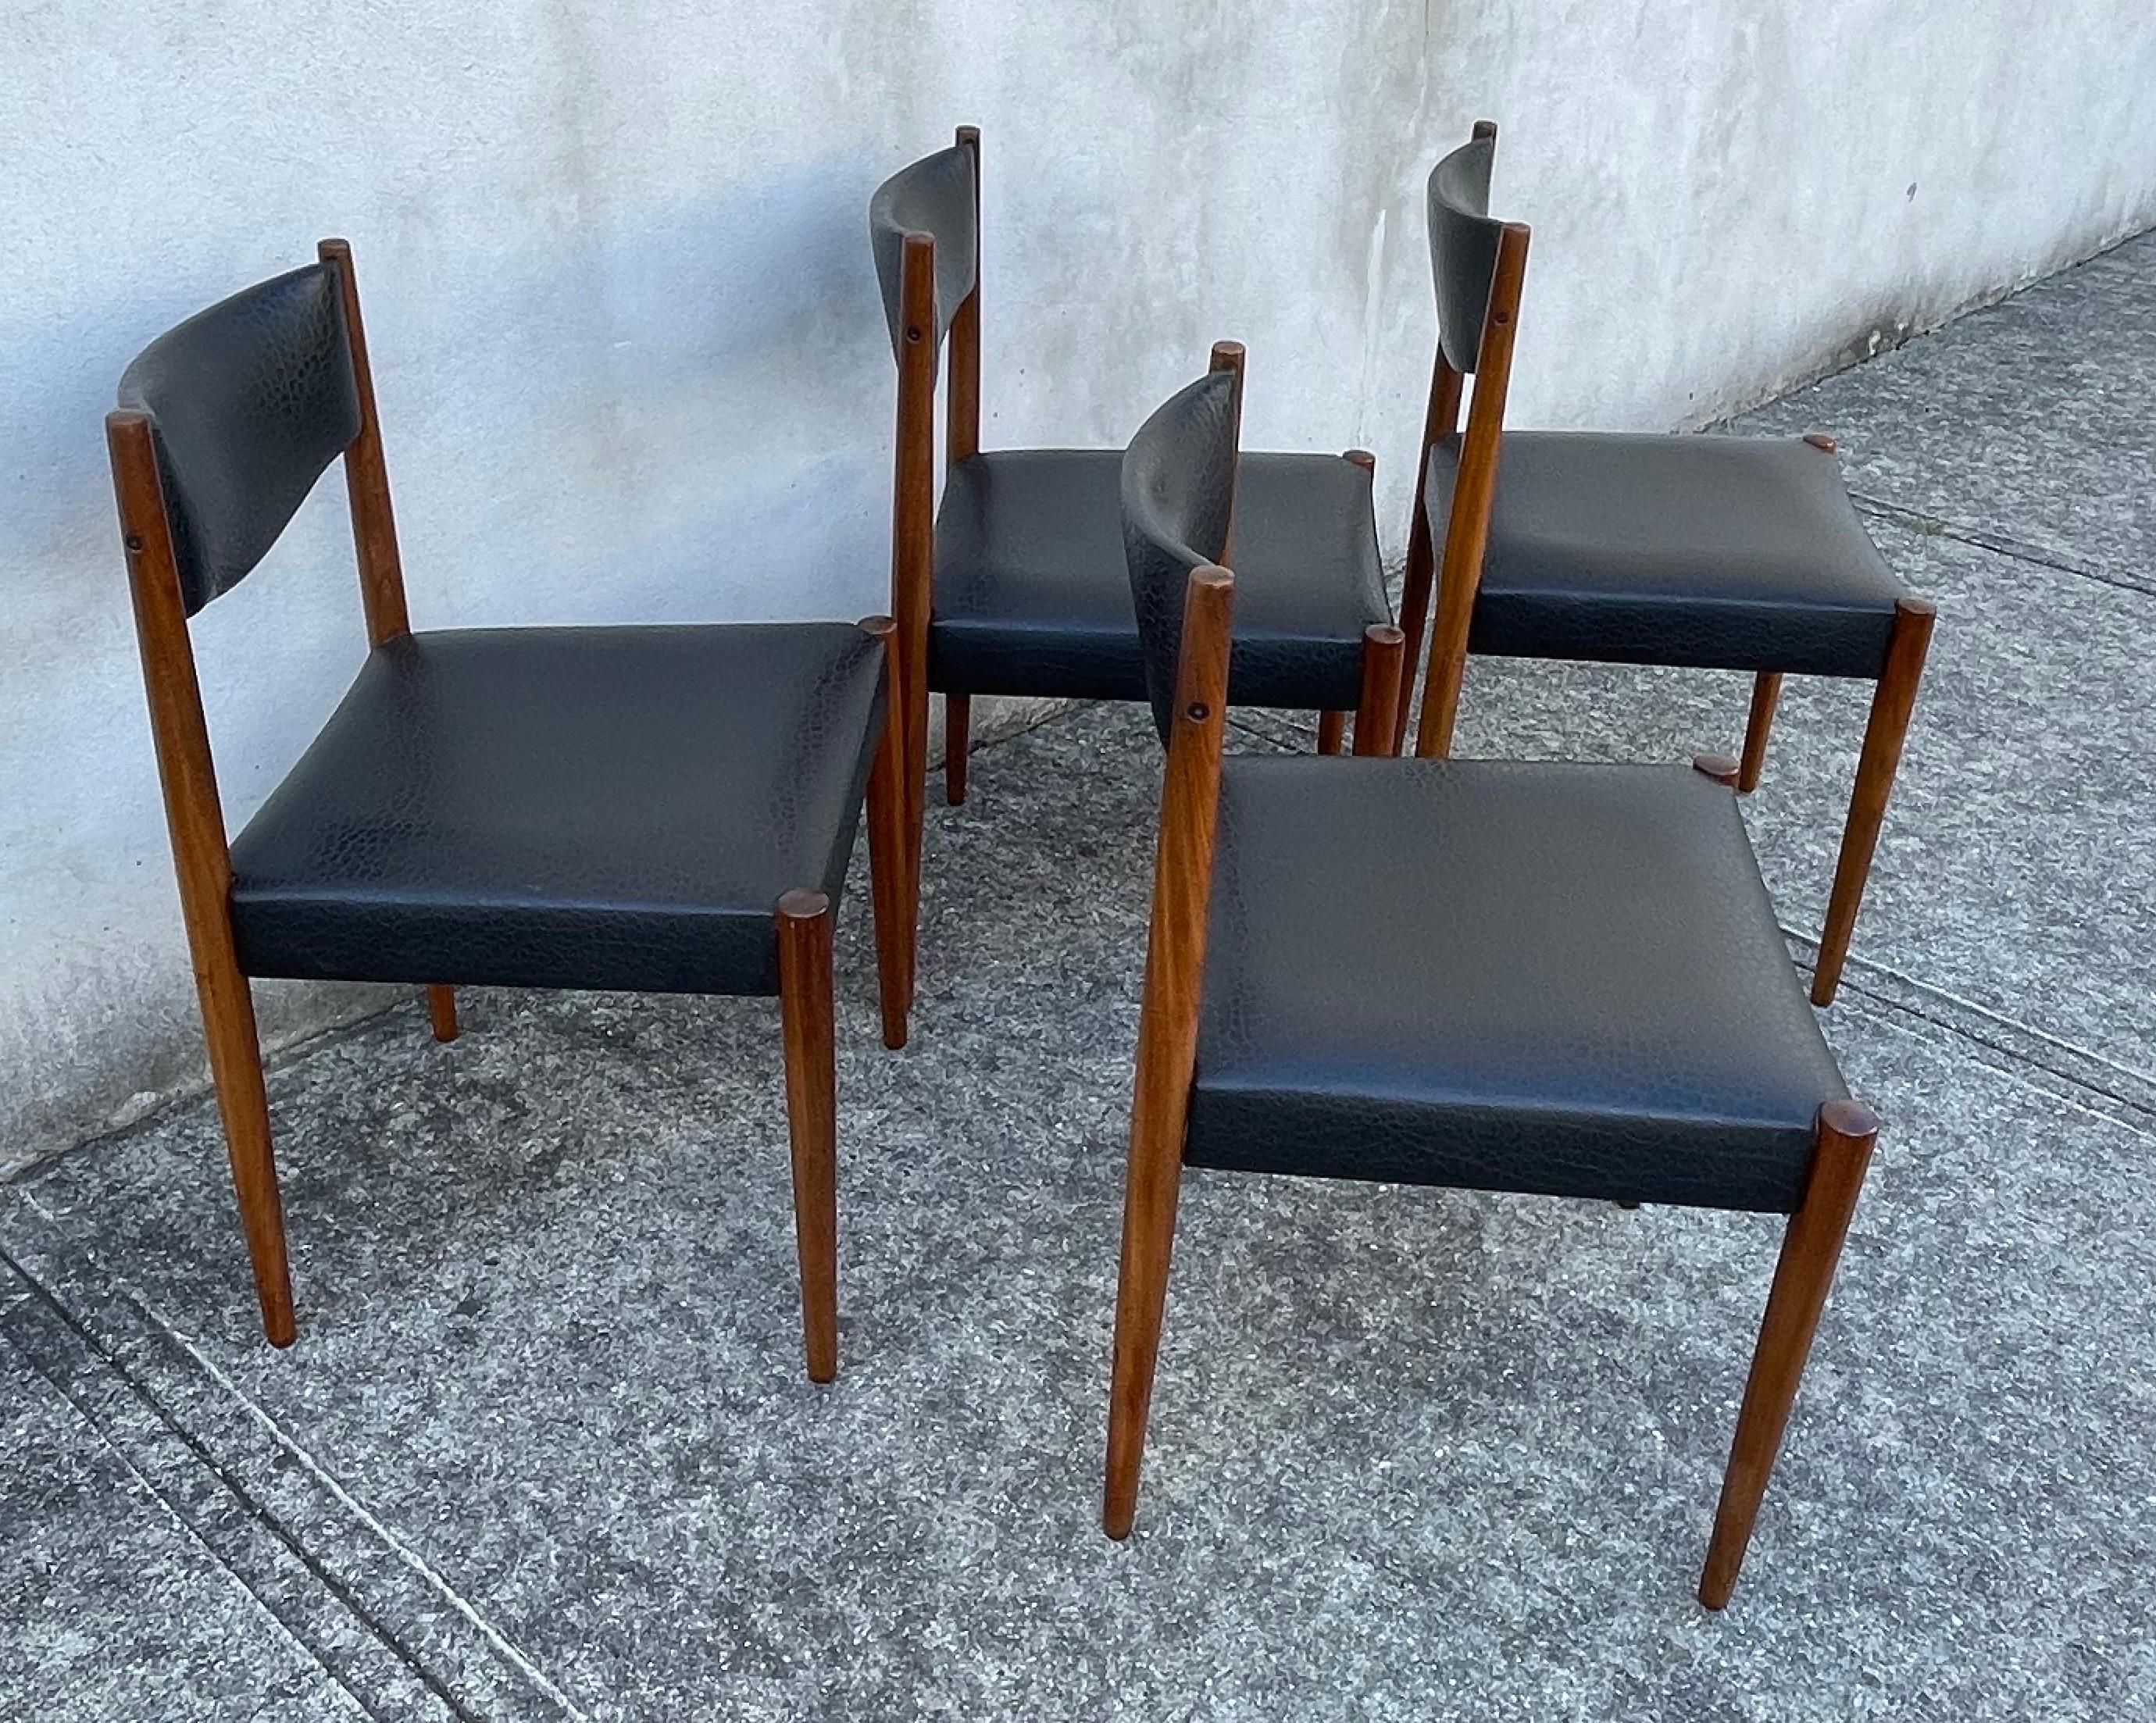 Mid-20th Century Set of Four Mid-Century Modern Teak Dining Chairs, Faux Black Leather Seats For Sale